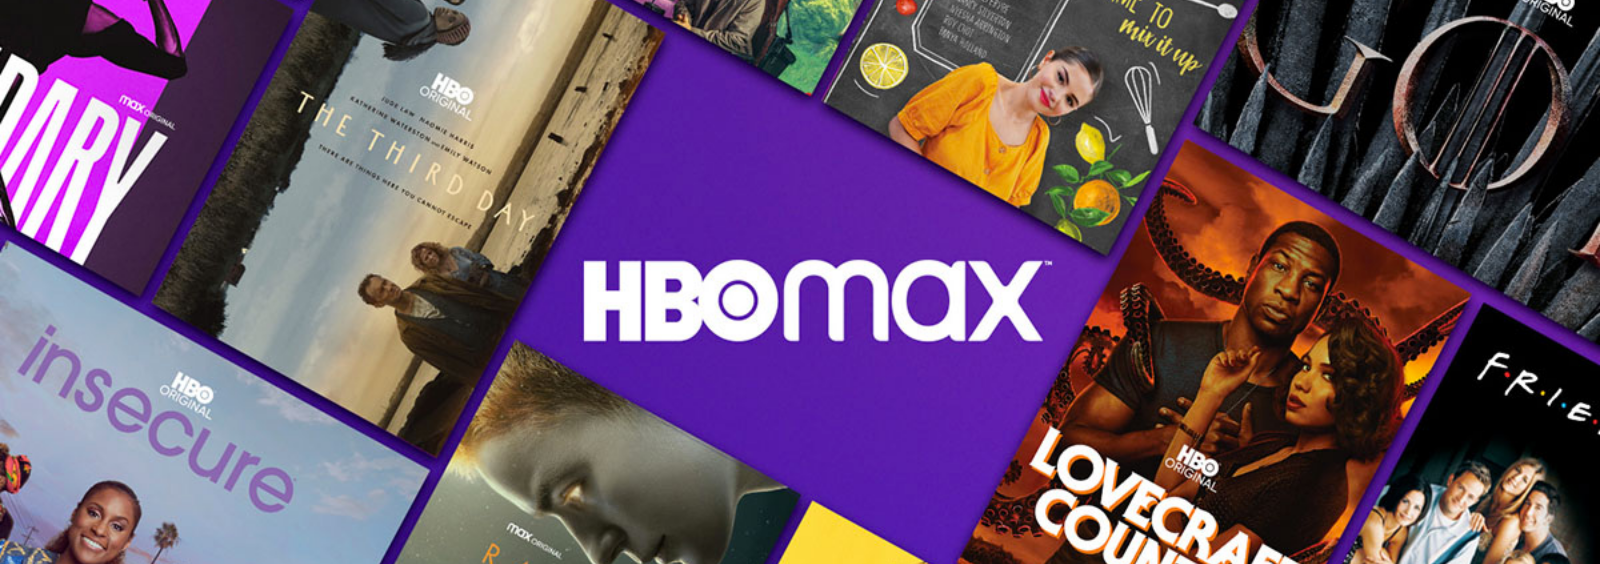 HBO Max - 